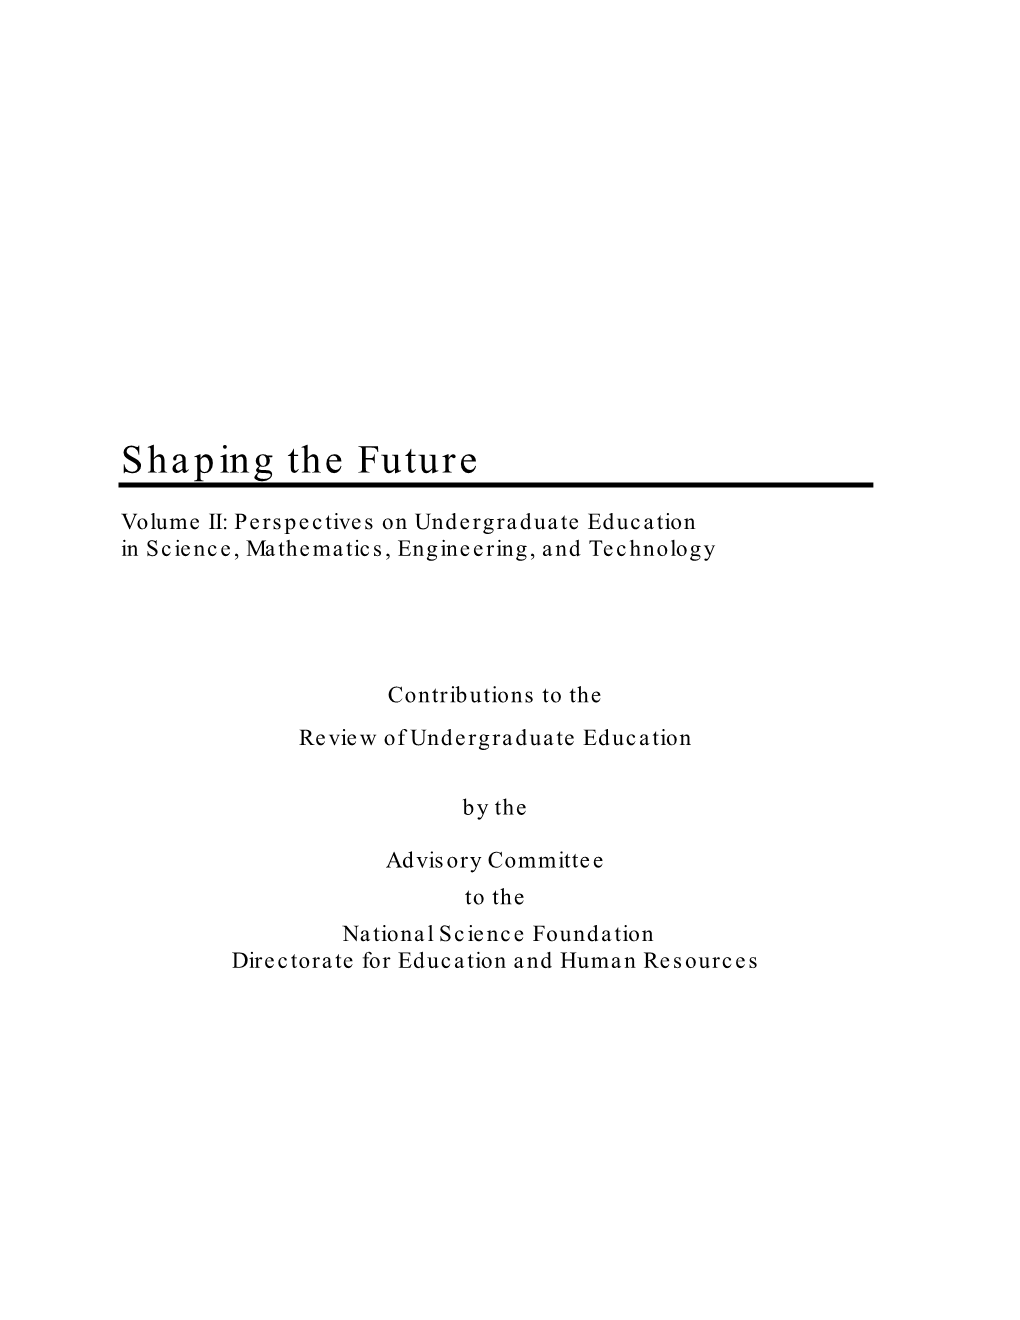 View the Entire Document in PDF, Shaping the Future, Volume 2